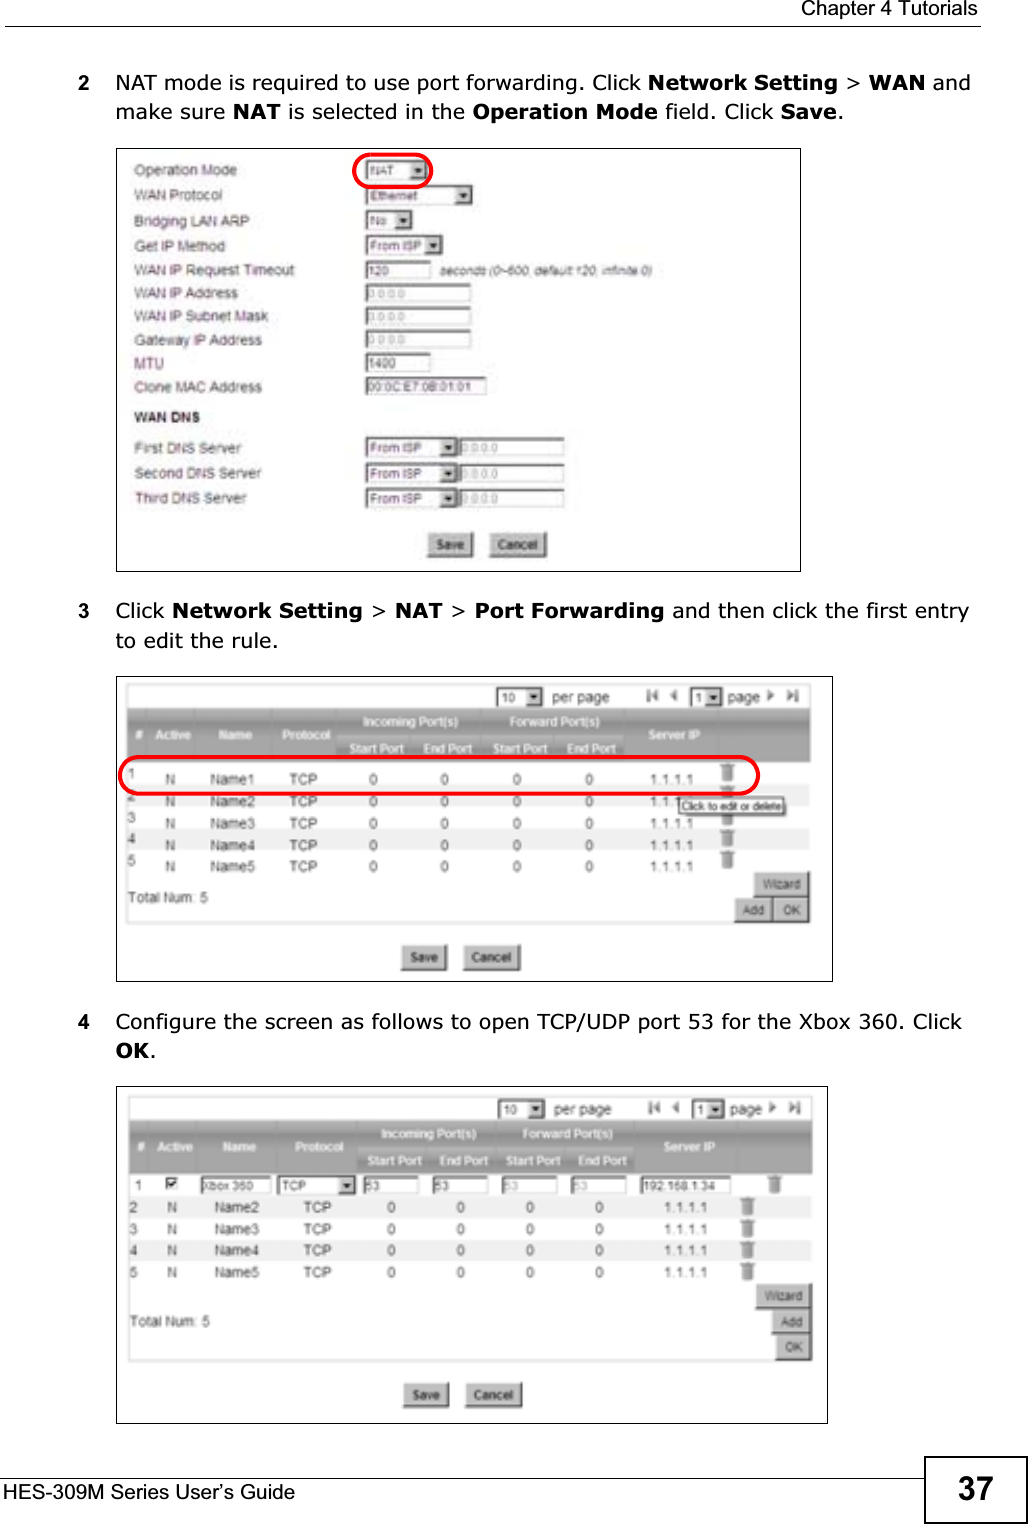  Chapter 4 TutorialsHES-309M Series User’s Guide 372NAT mode is required to use port forwarding. Click Network Setting &gt; WAN and make sure NAT is selected in the Operation Mode field. Click Save.3Click Network Setting &gt; NAT &gt; Port Forwarding and then click the first entry to edit the rule.4Configure the screen as follows to open TCP/UDP port 53 for the Xbox 360. Click OK.